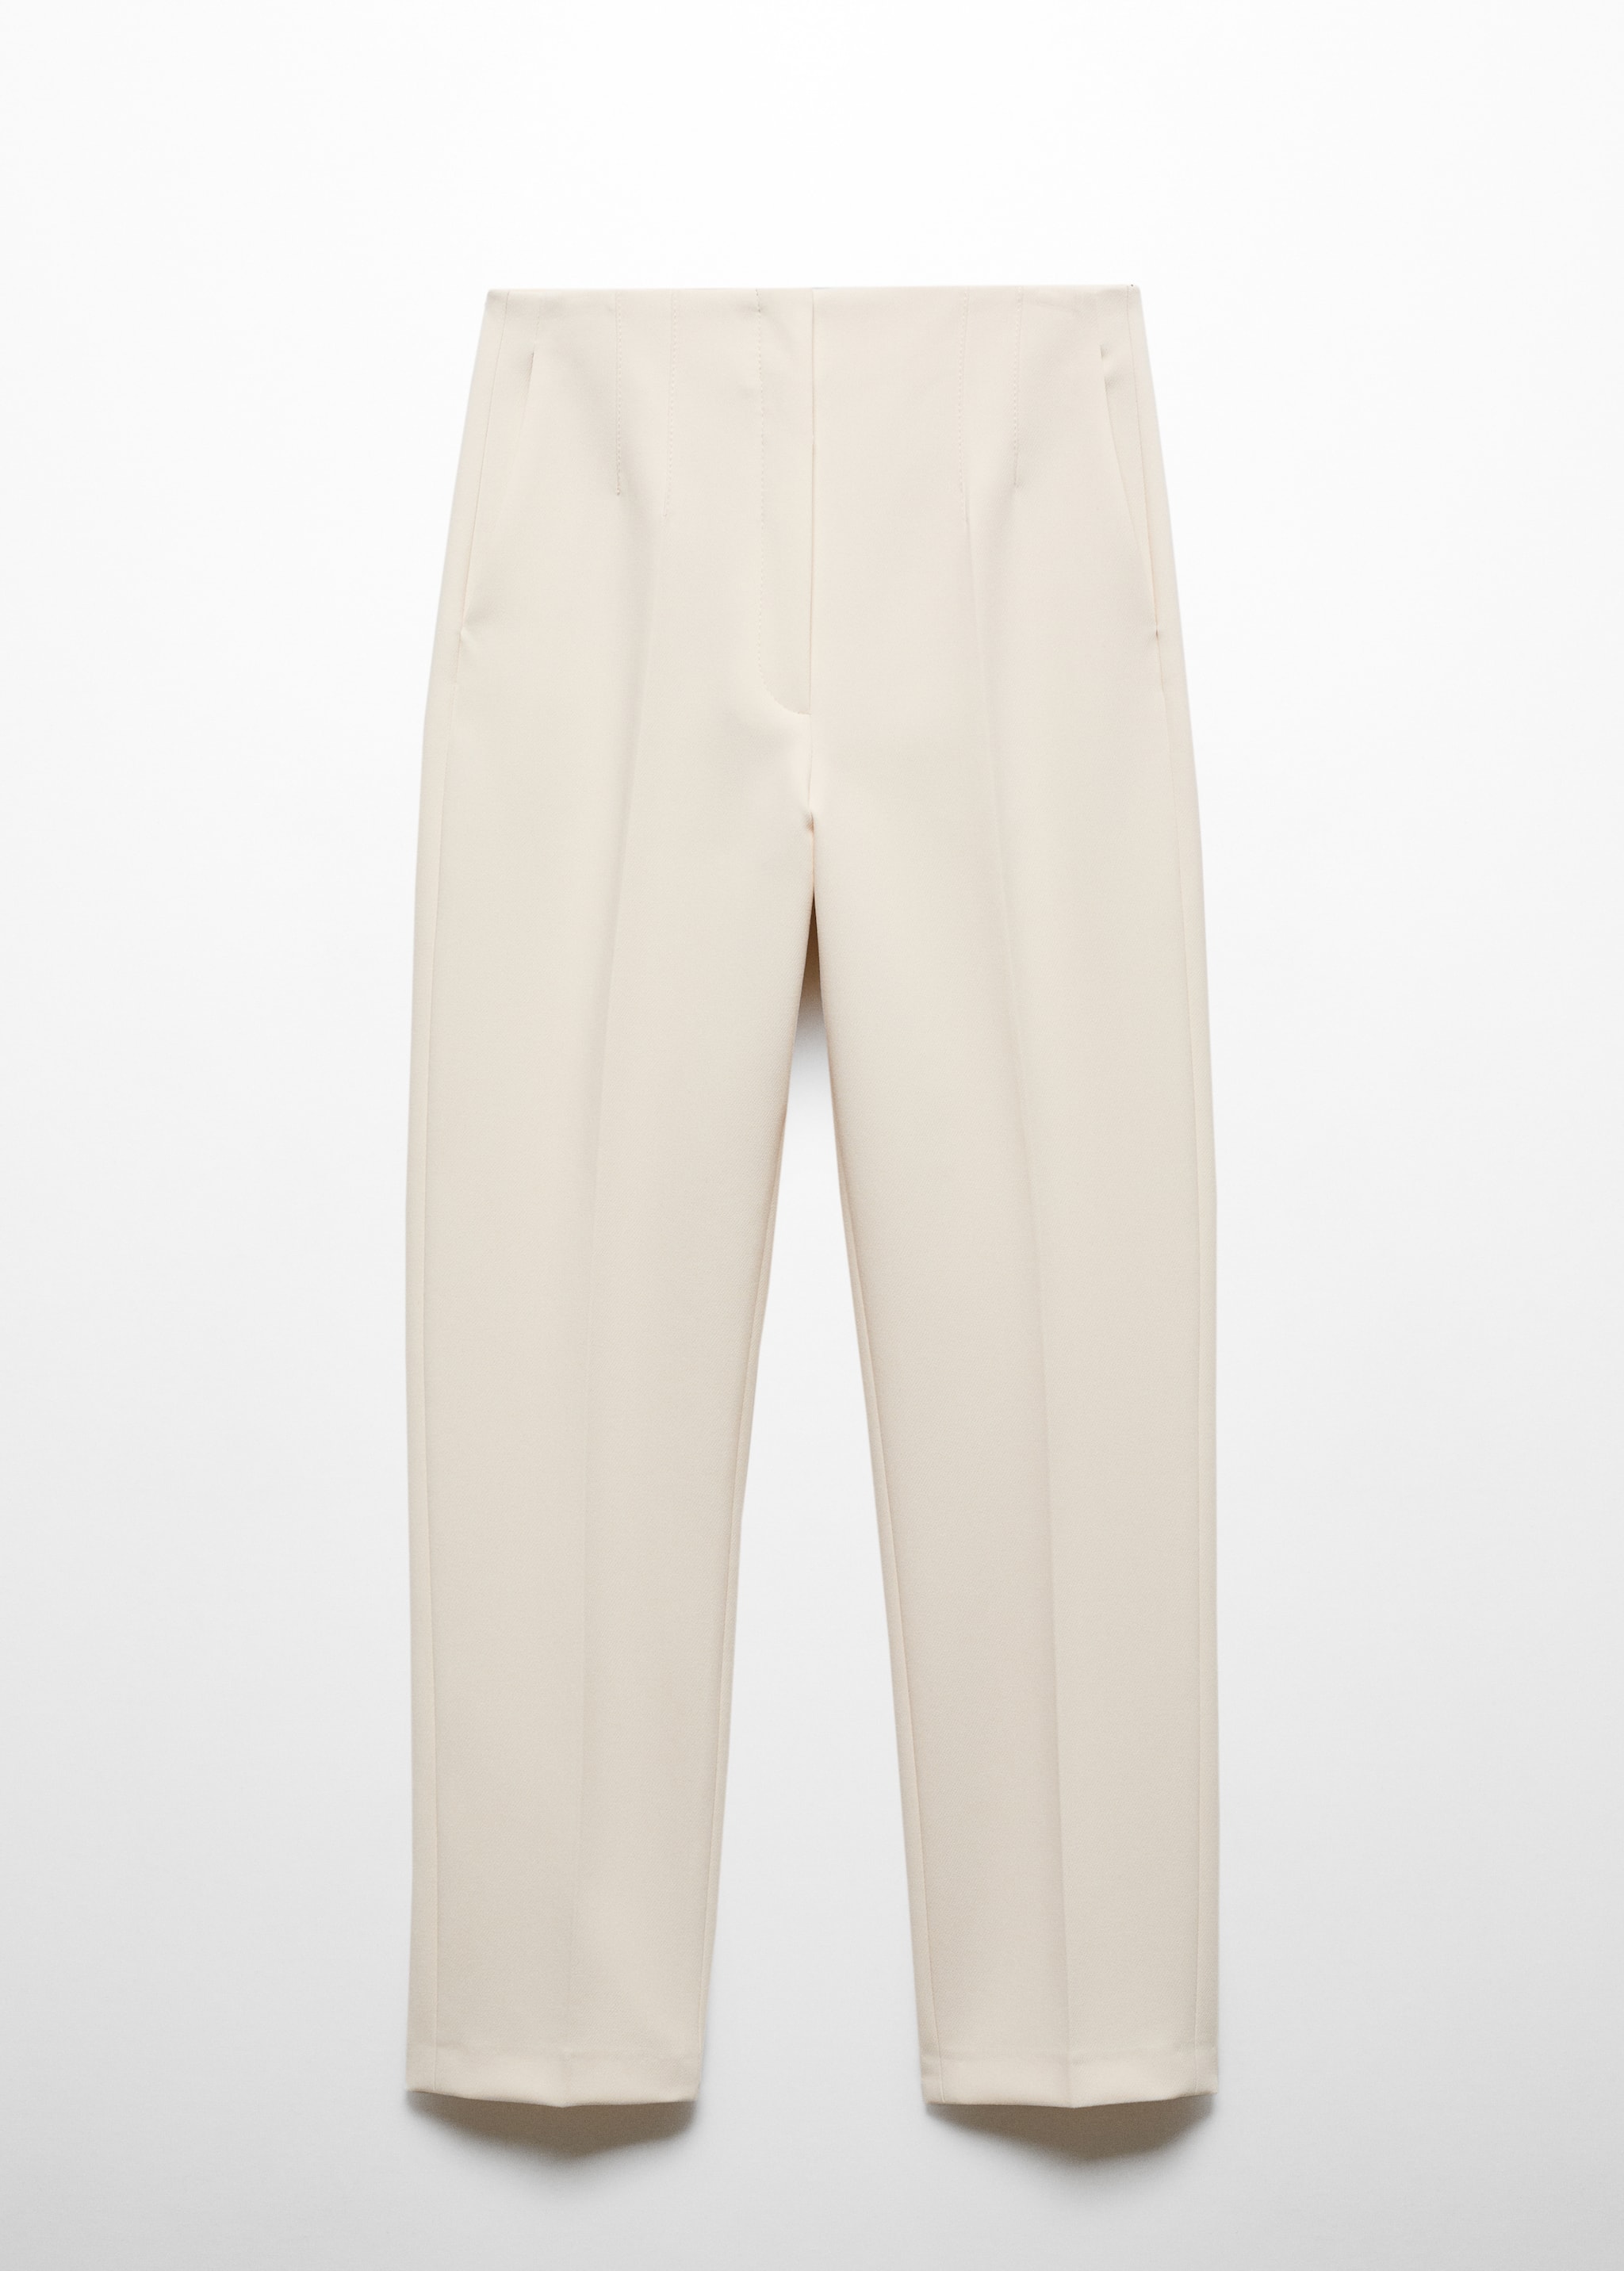 Pleat detail trousers - Article without model